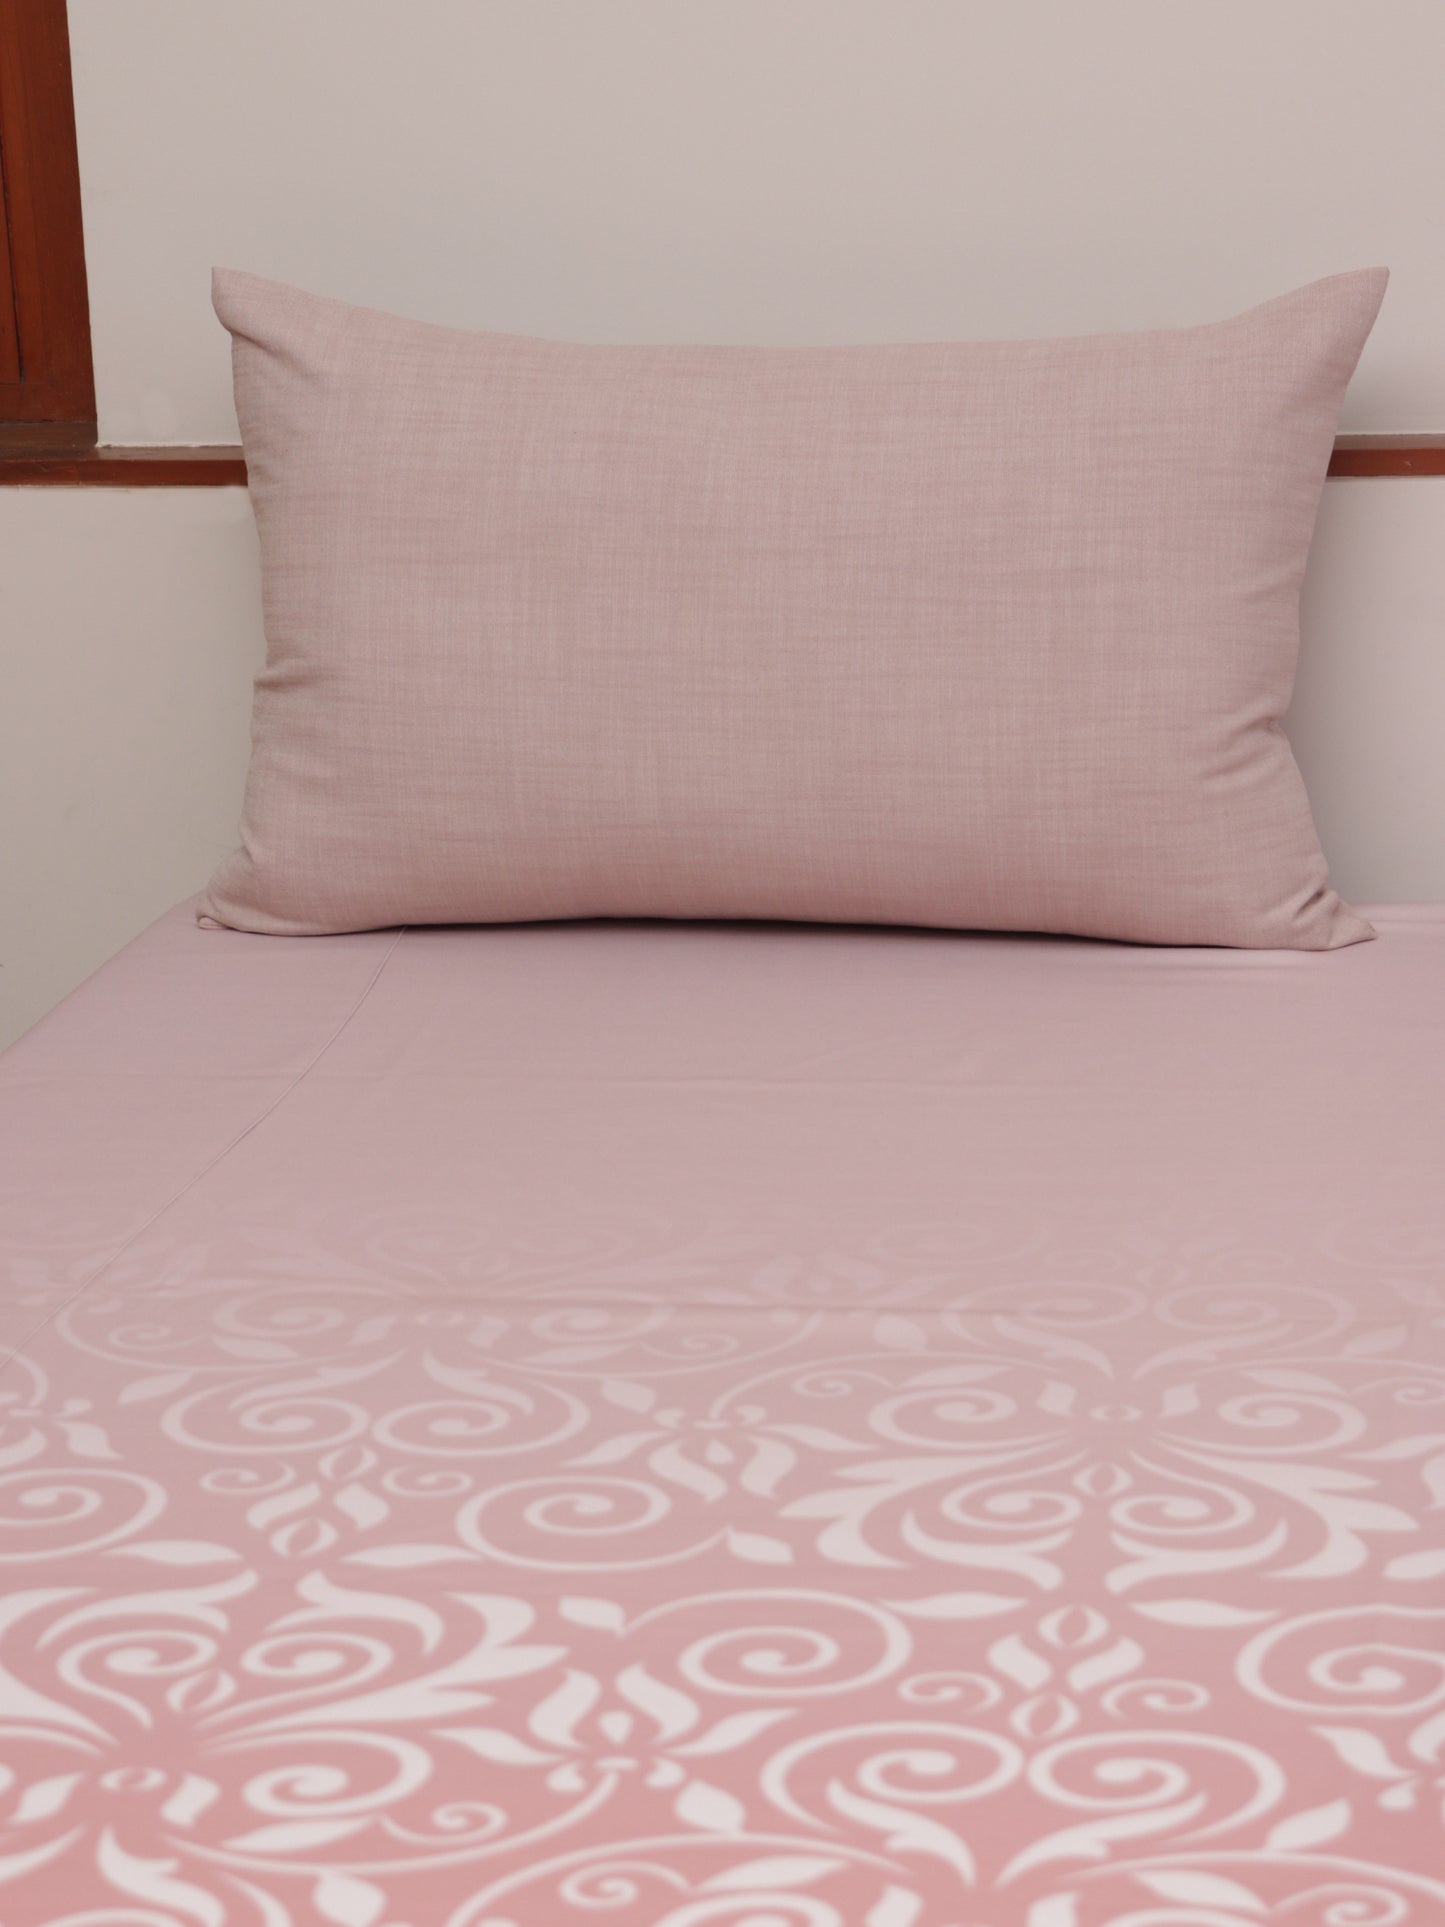 Bedcover With 2 Pilllow Sham Cotton Blend Floral Printed Coral - 90" X 108", 17" X 27"